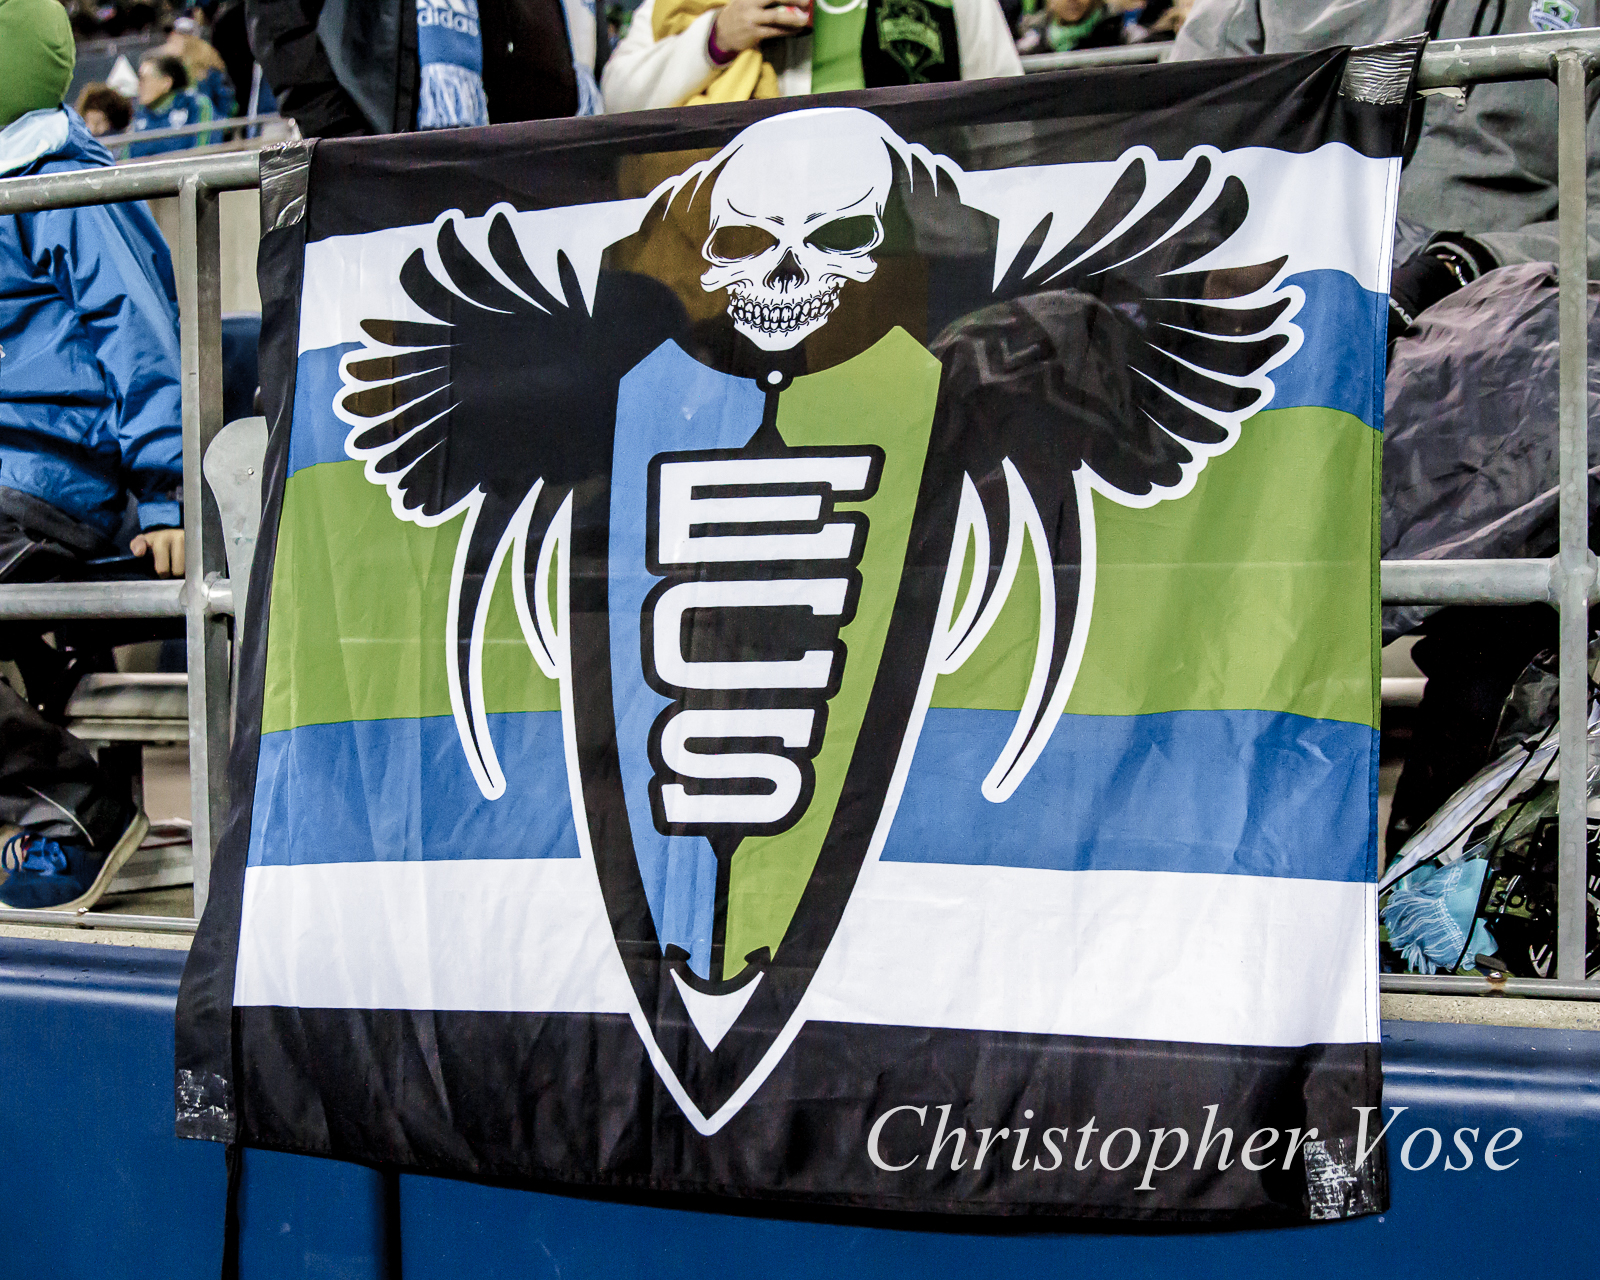 2017-11-02 Emerald City Supporters Flag.jpg